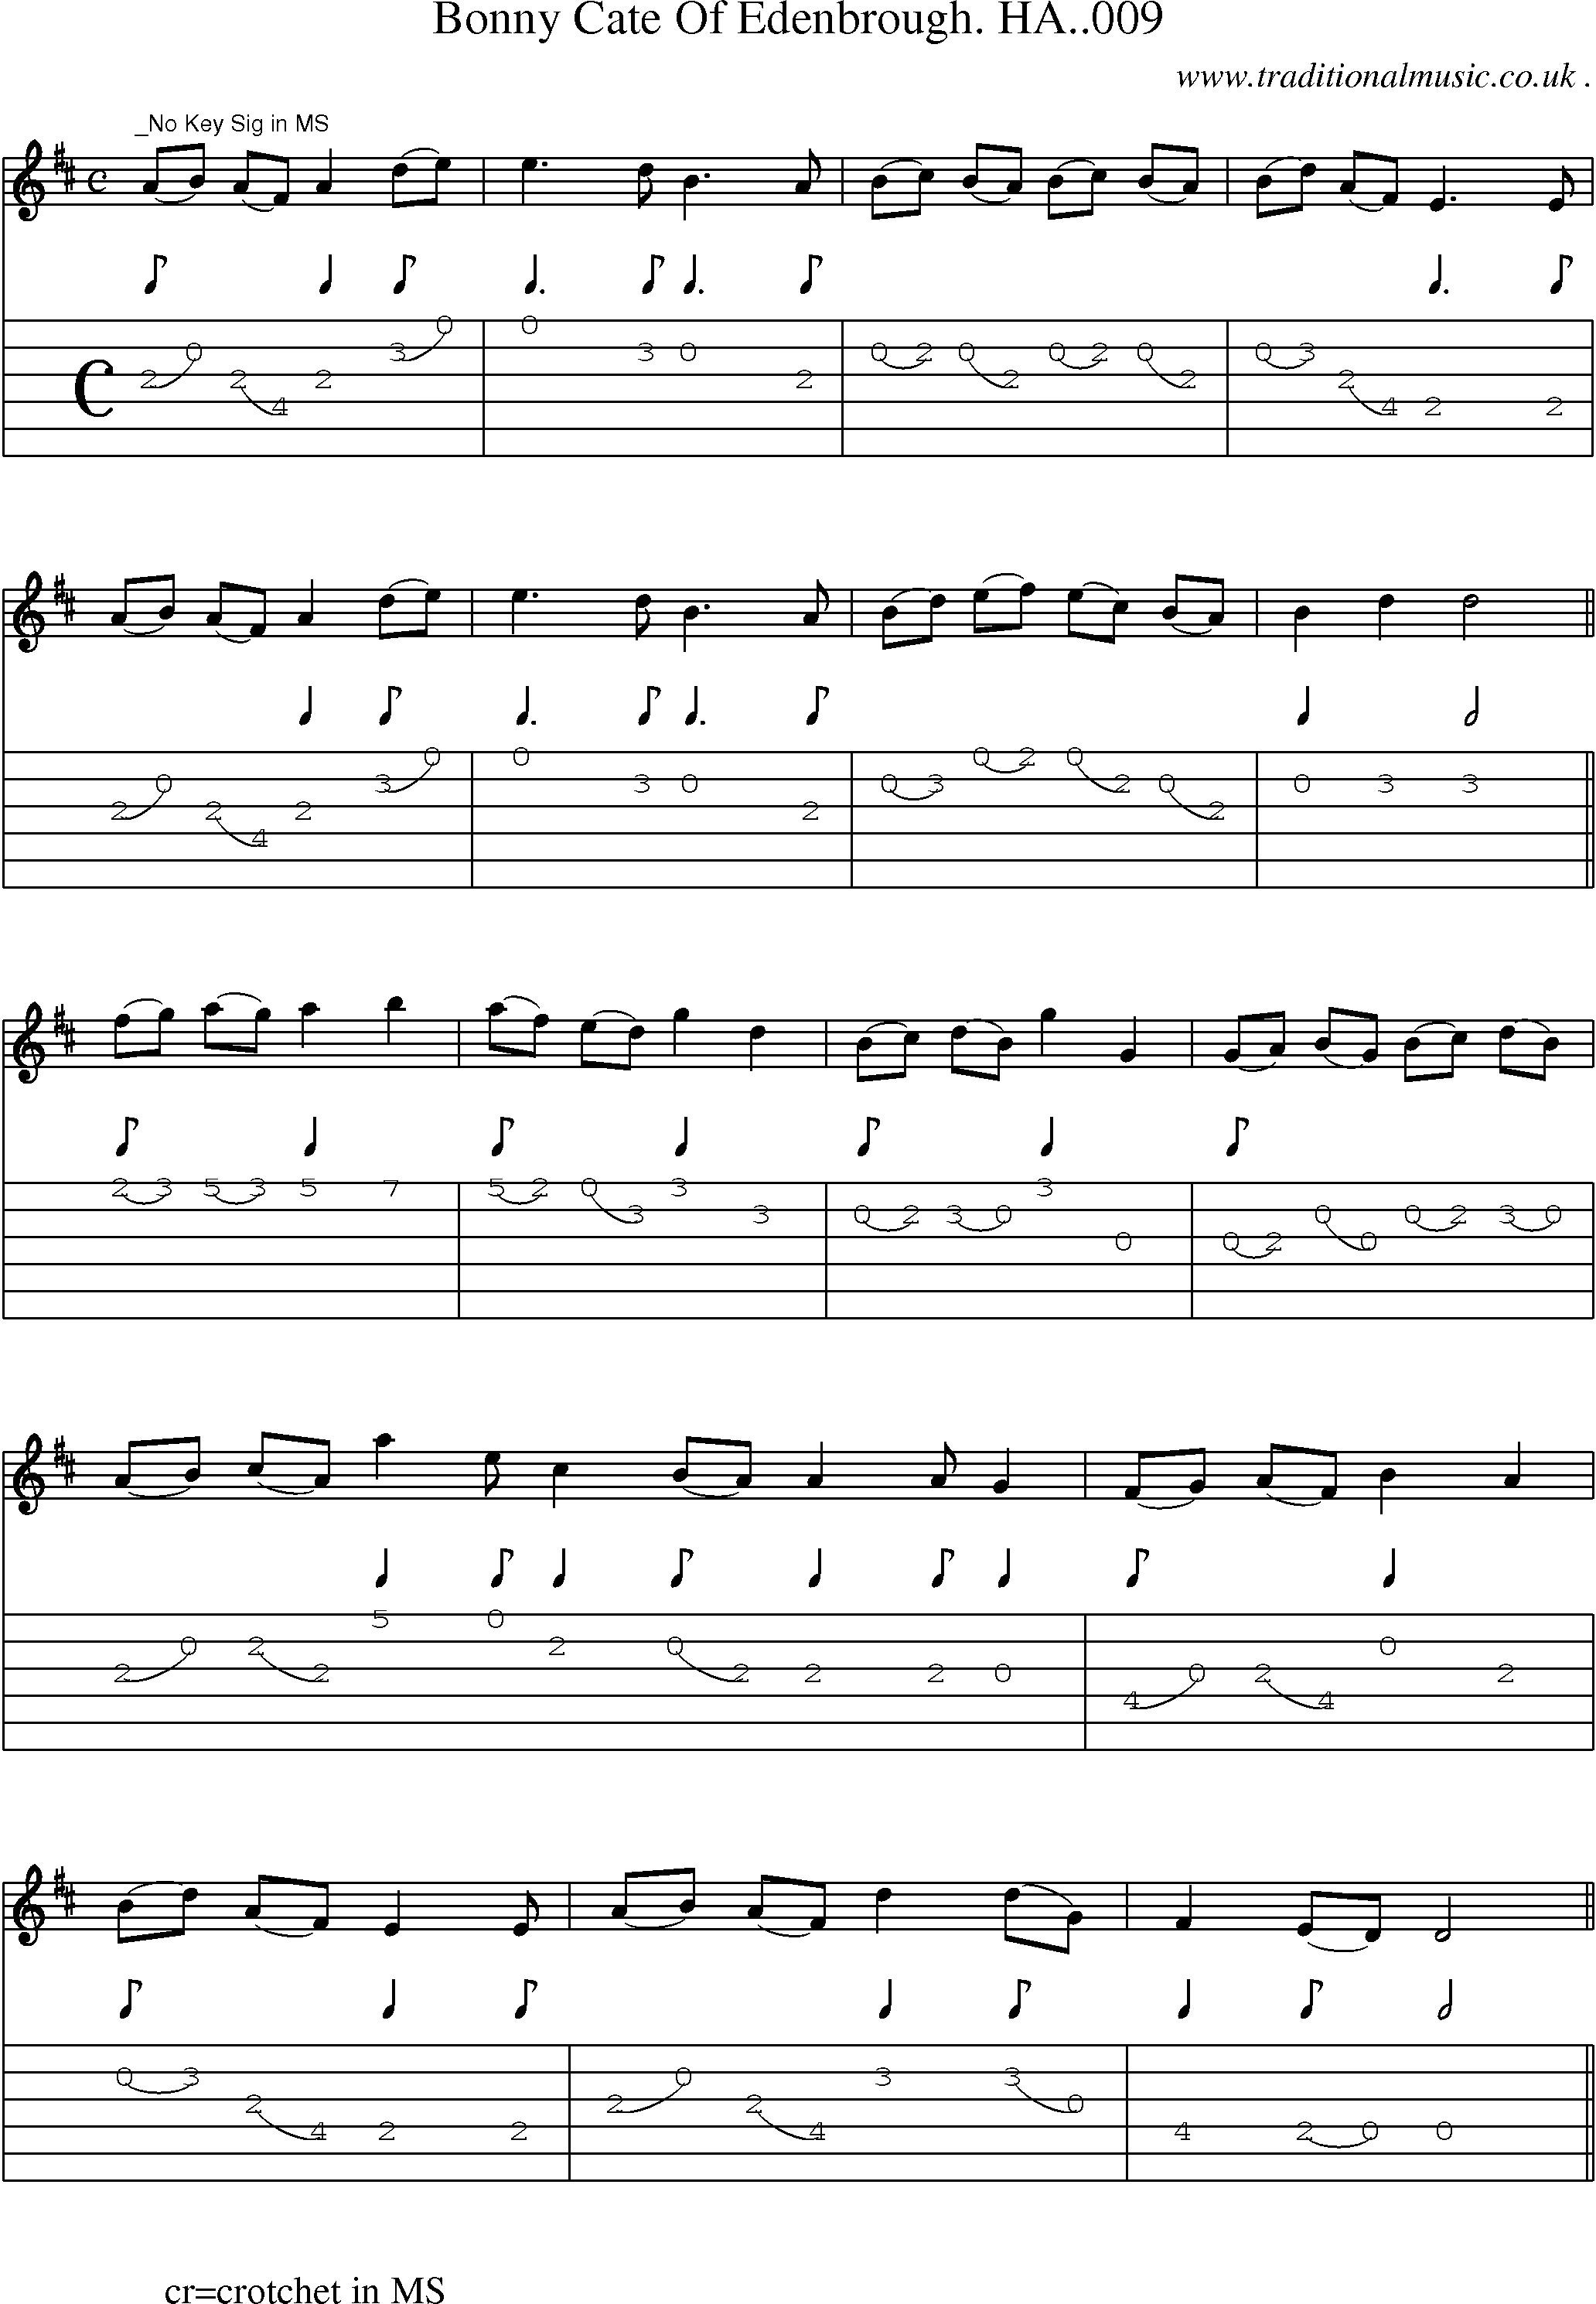 Sheet-Music and Guitar Tabs for Bonny Cate Of Edenbrough Ha009